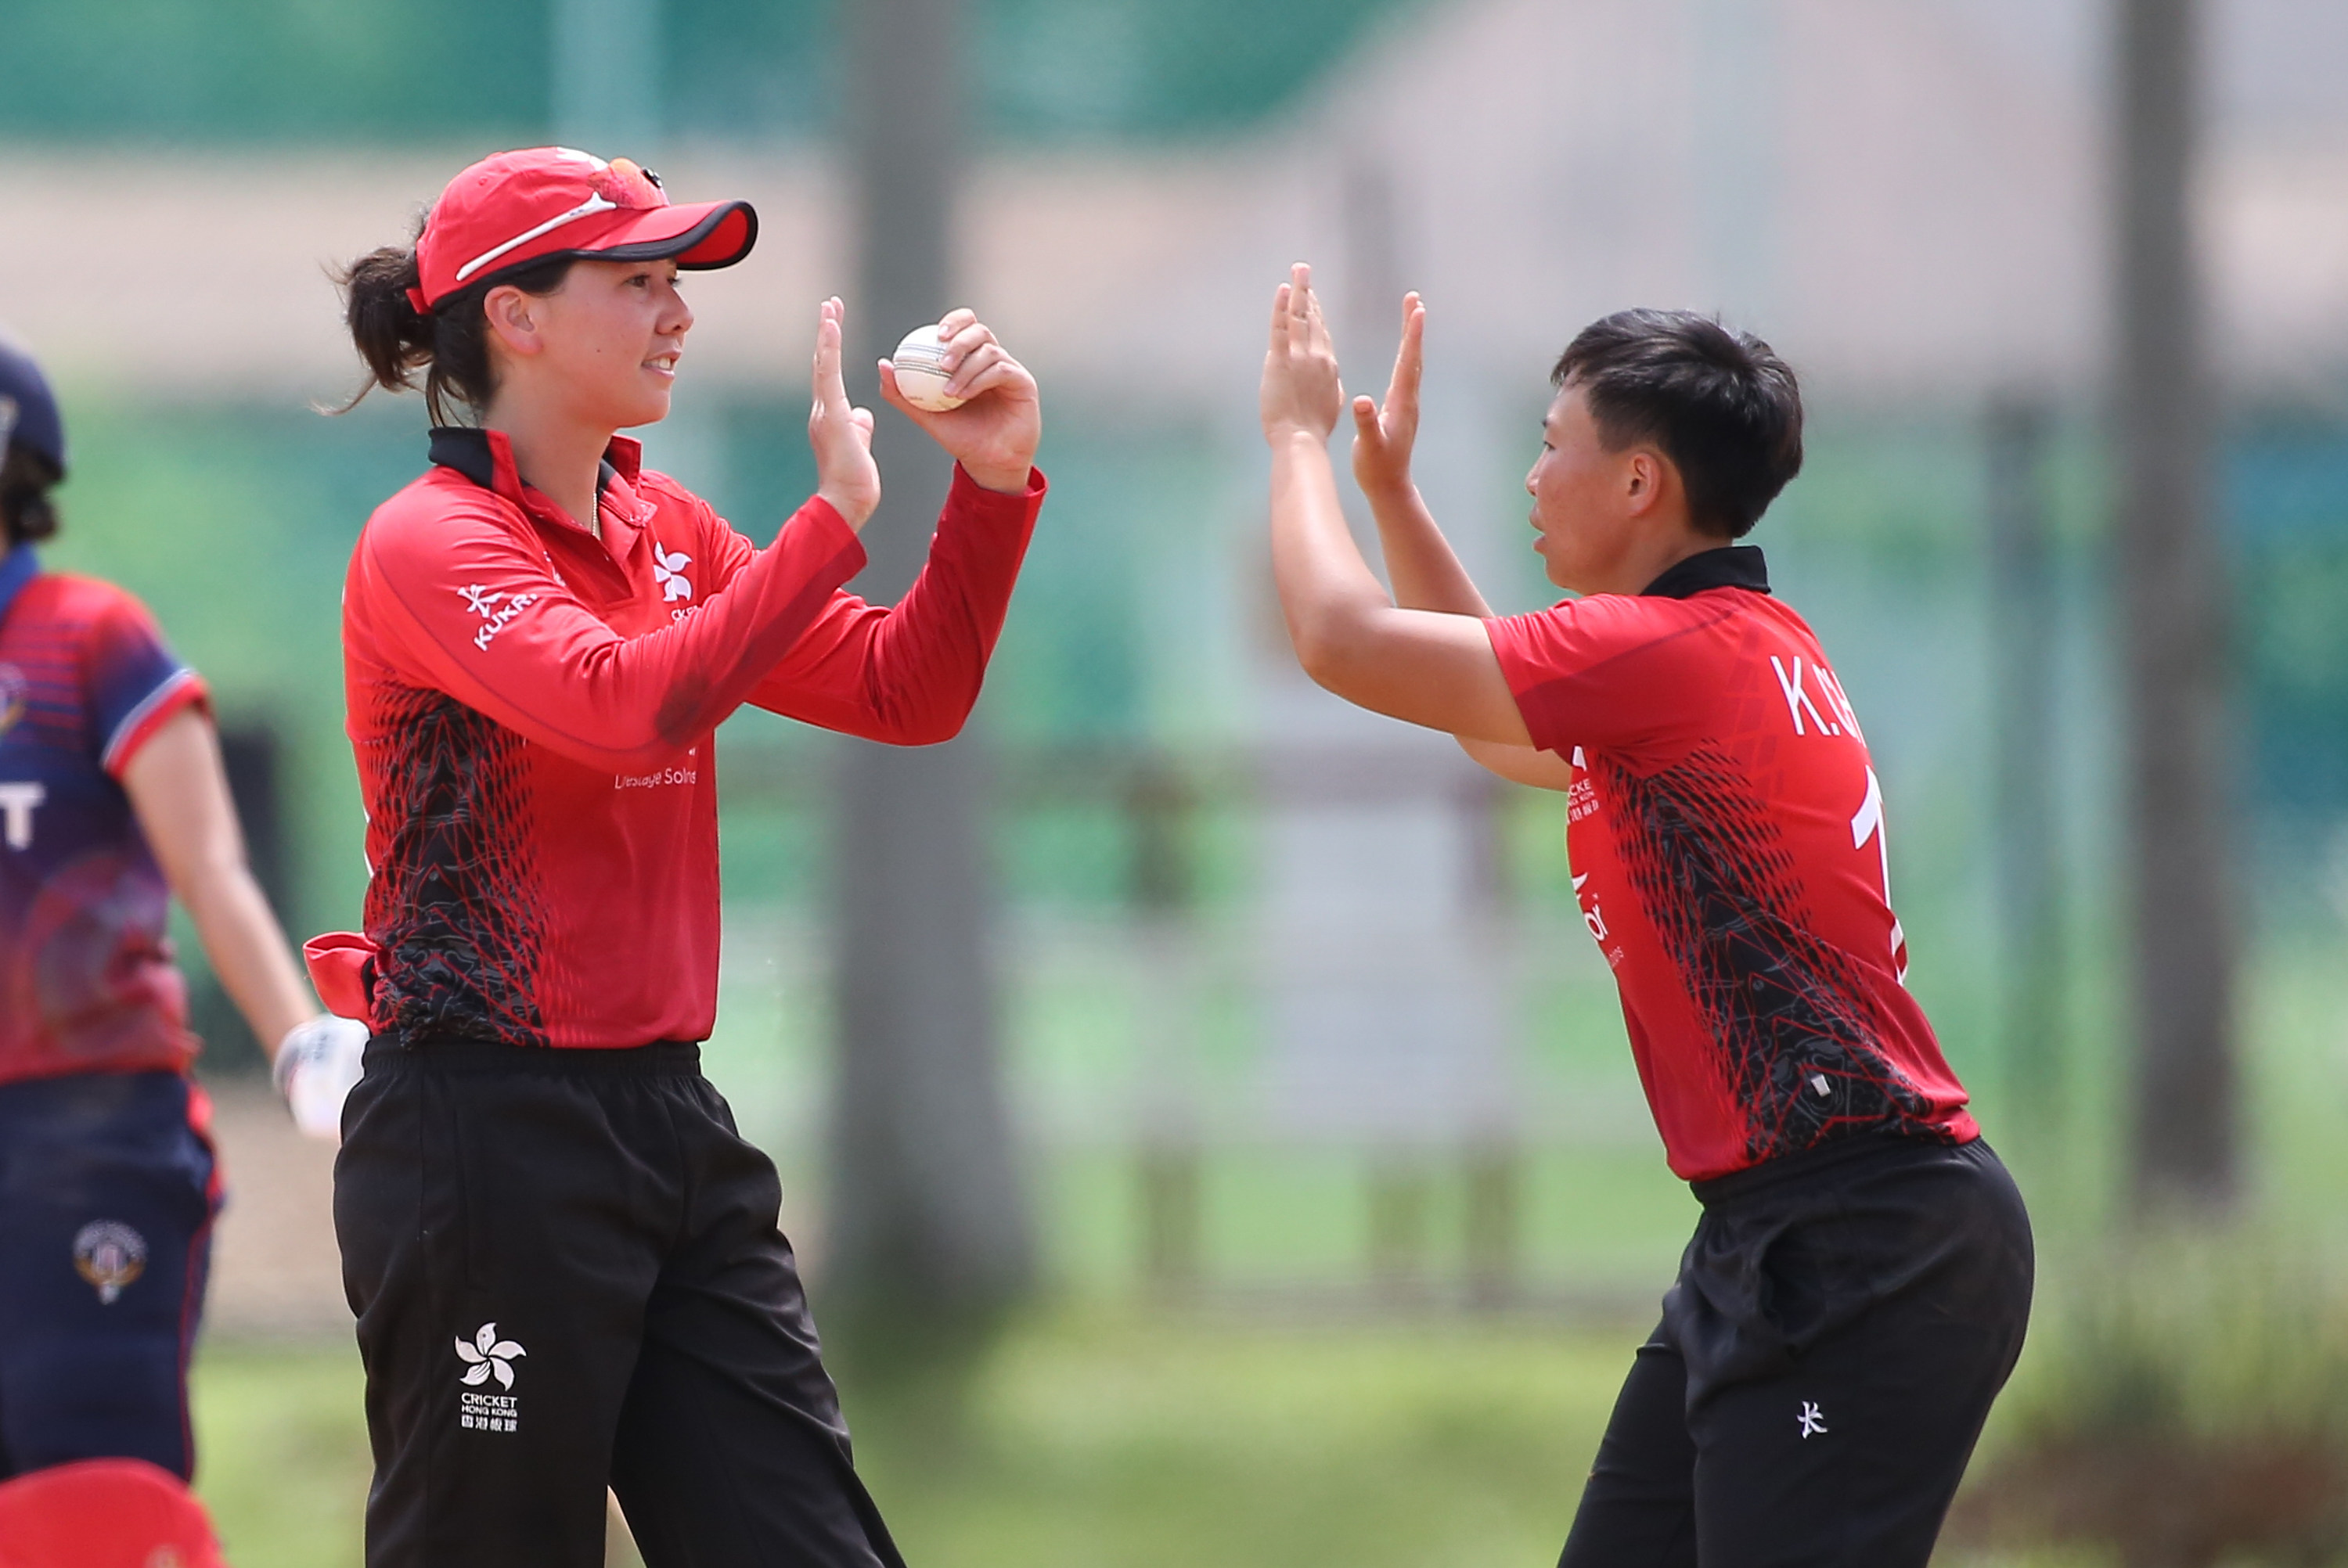 Natasha Miles (left) and Hong Kong captain Kary Chan celebrate after taking the wicket of Priyada Murali during a game in Malaysia. Photo: ACC